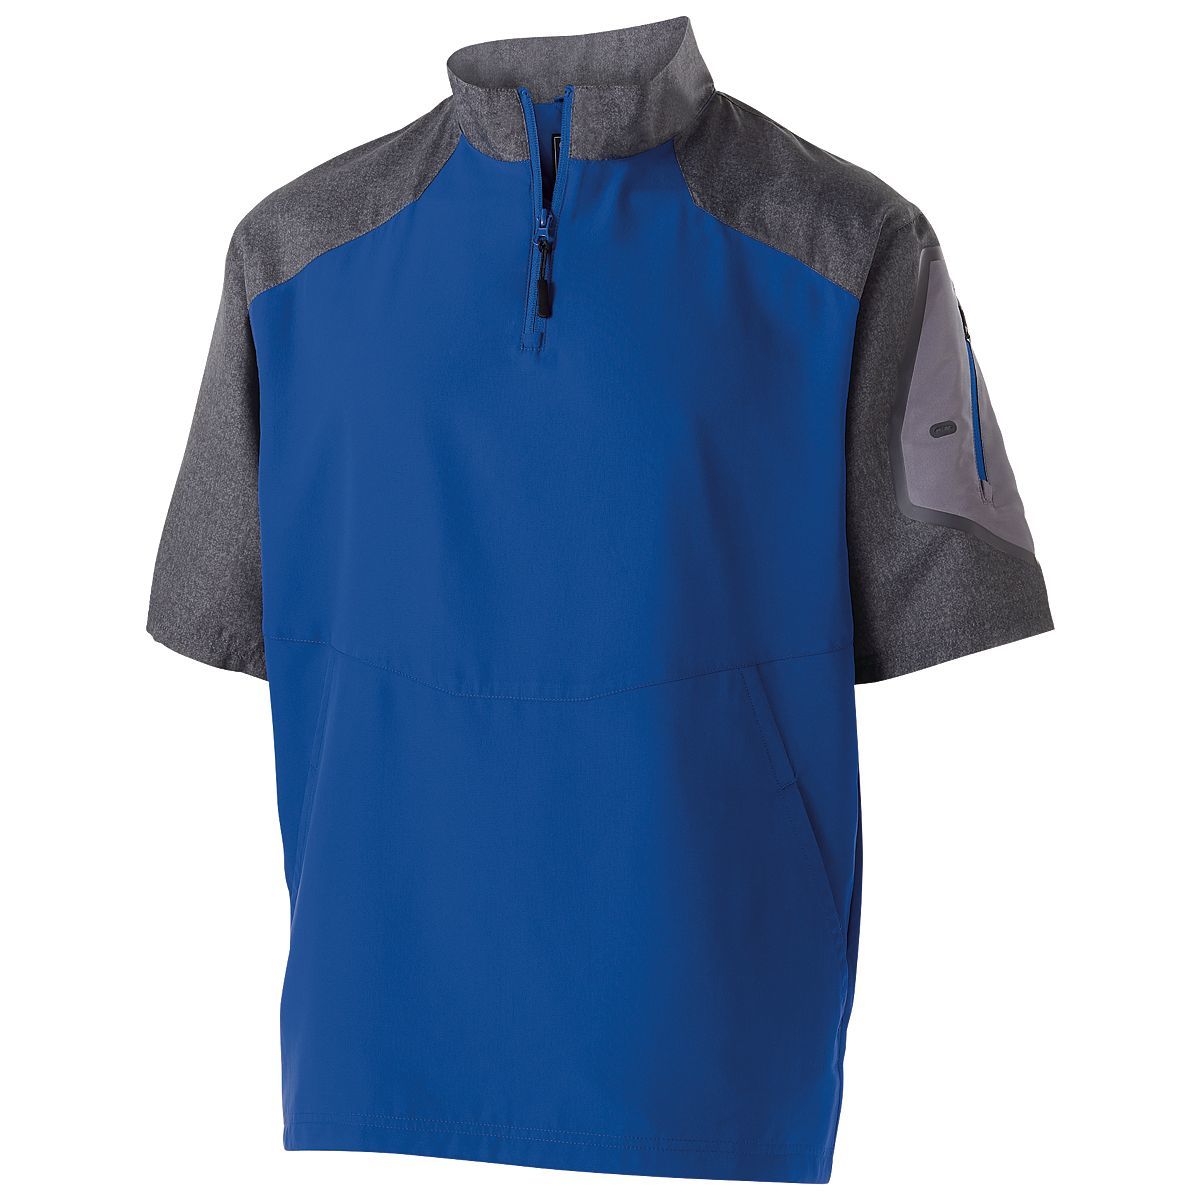 Holloway Raider  Short Sleeve Pullover in Carbon Print/Royal  -Part of the Adult, Adult-Pullover, Holloway, Outerwear product lines at KanaleyCreations.com